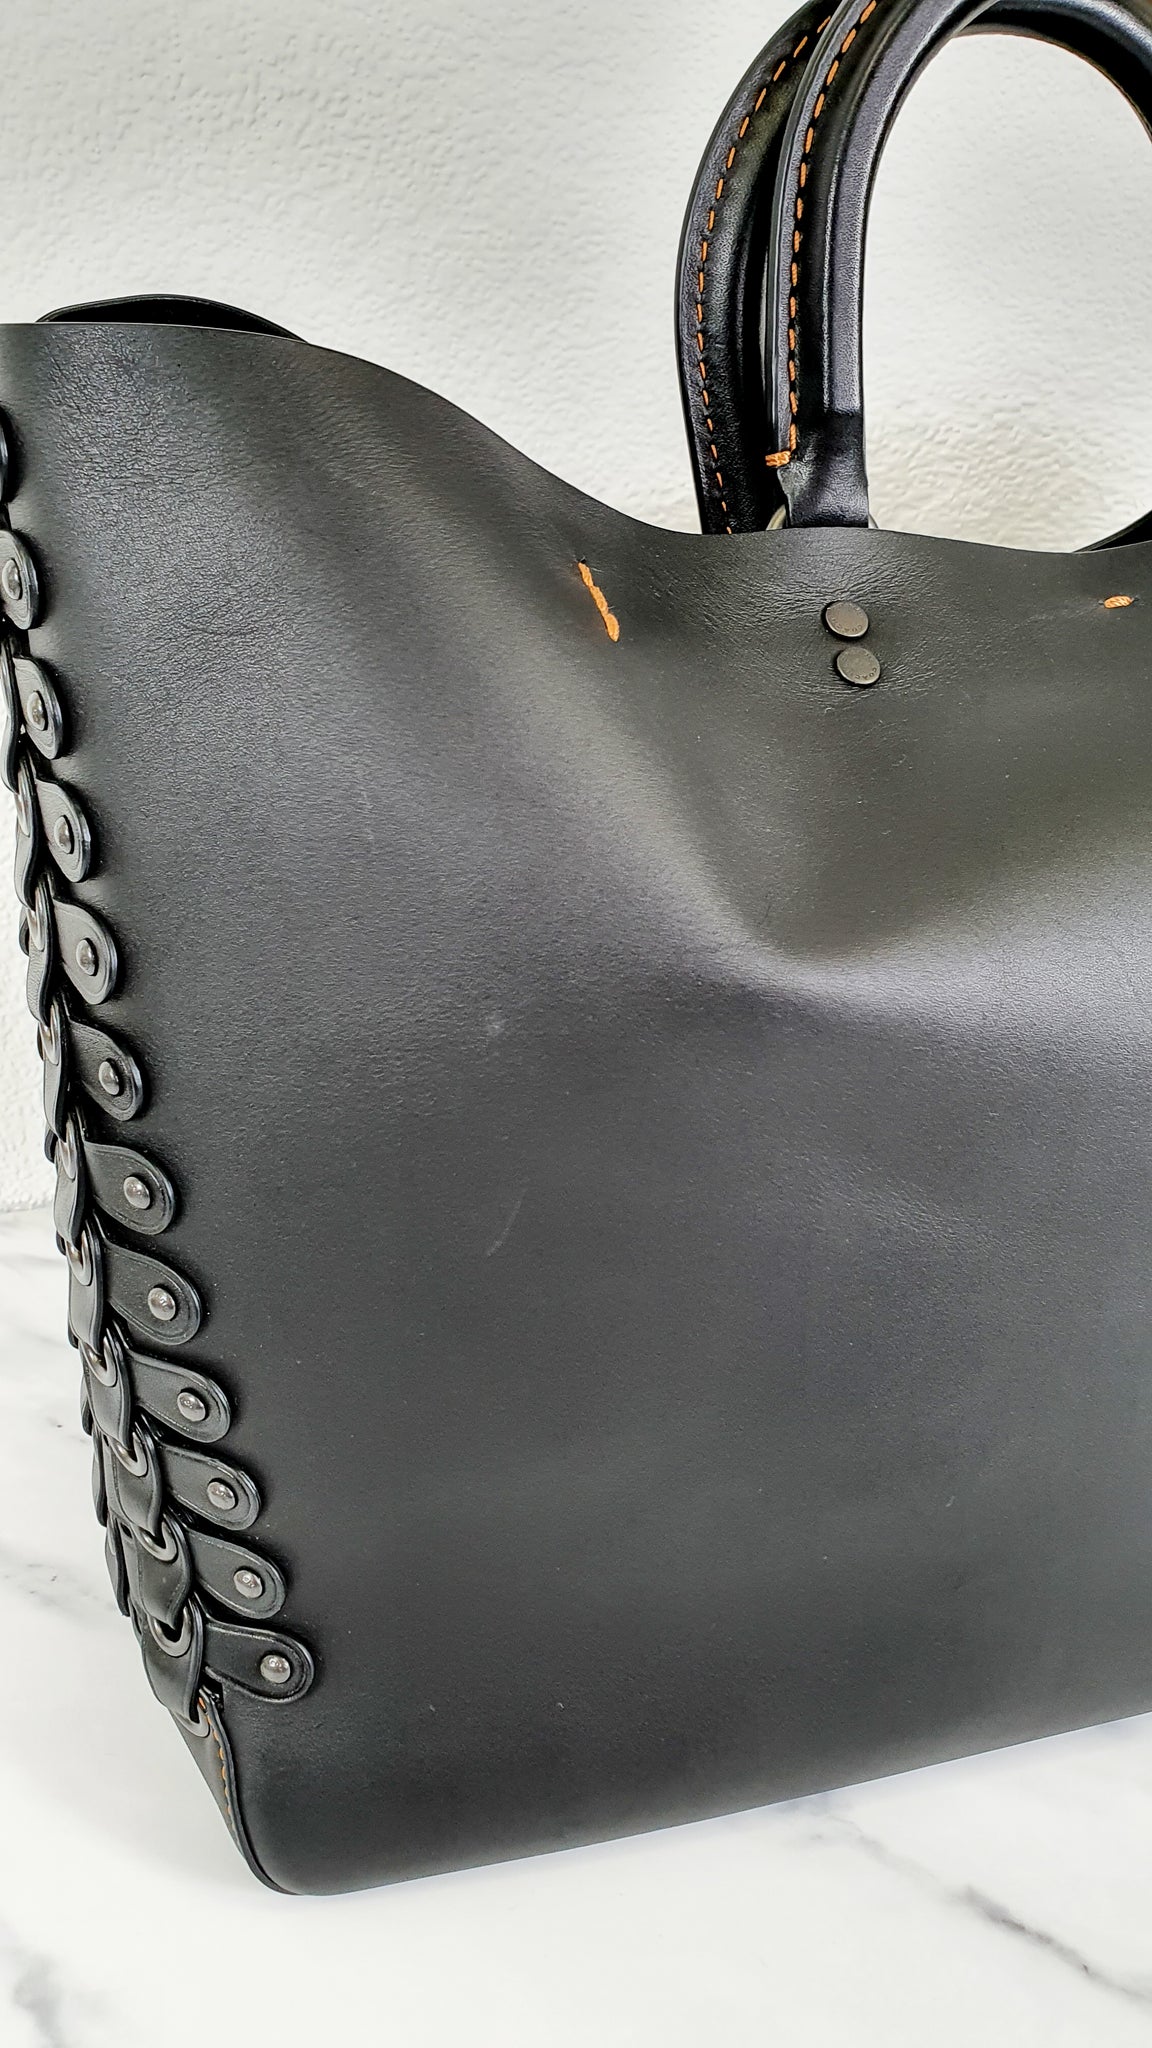 Coach 1941 Rogue Tote Bag With Links in Black Smooth Leather